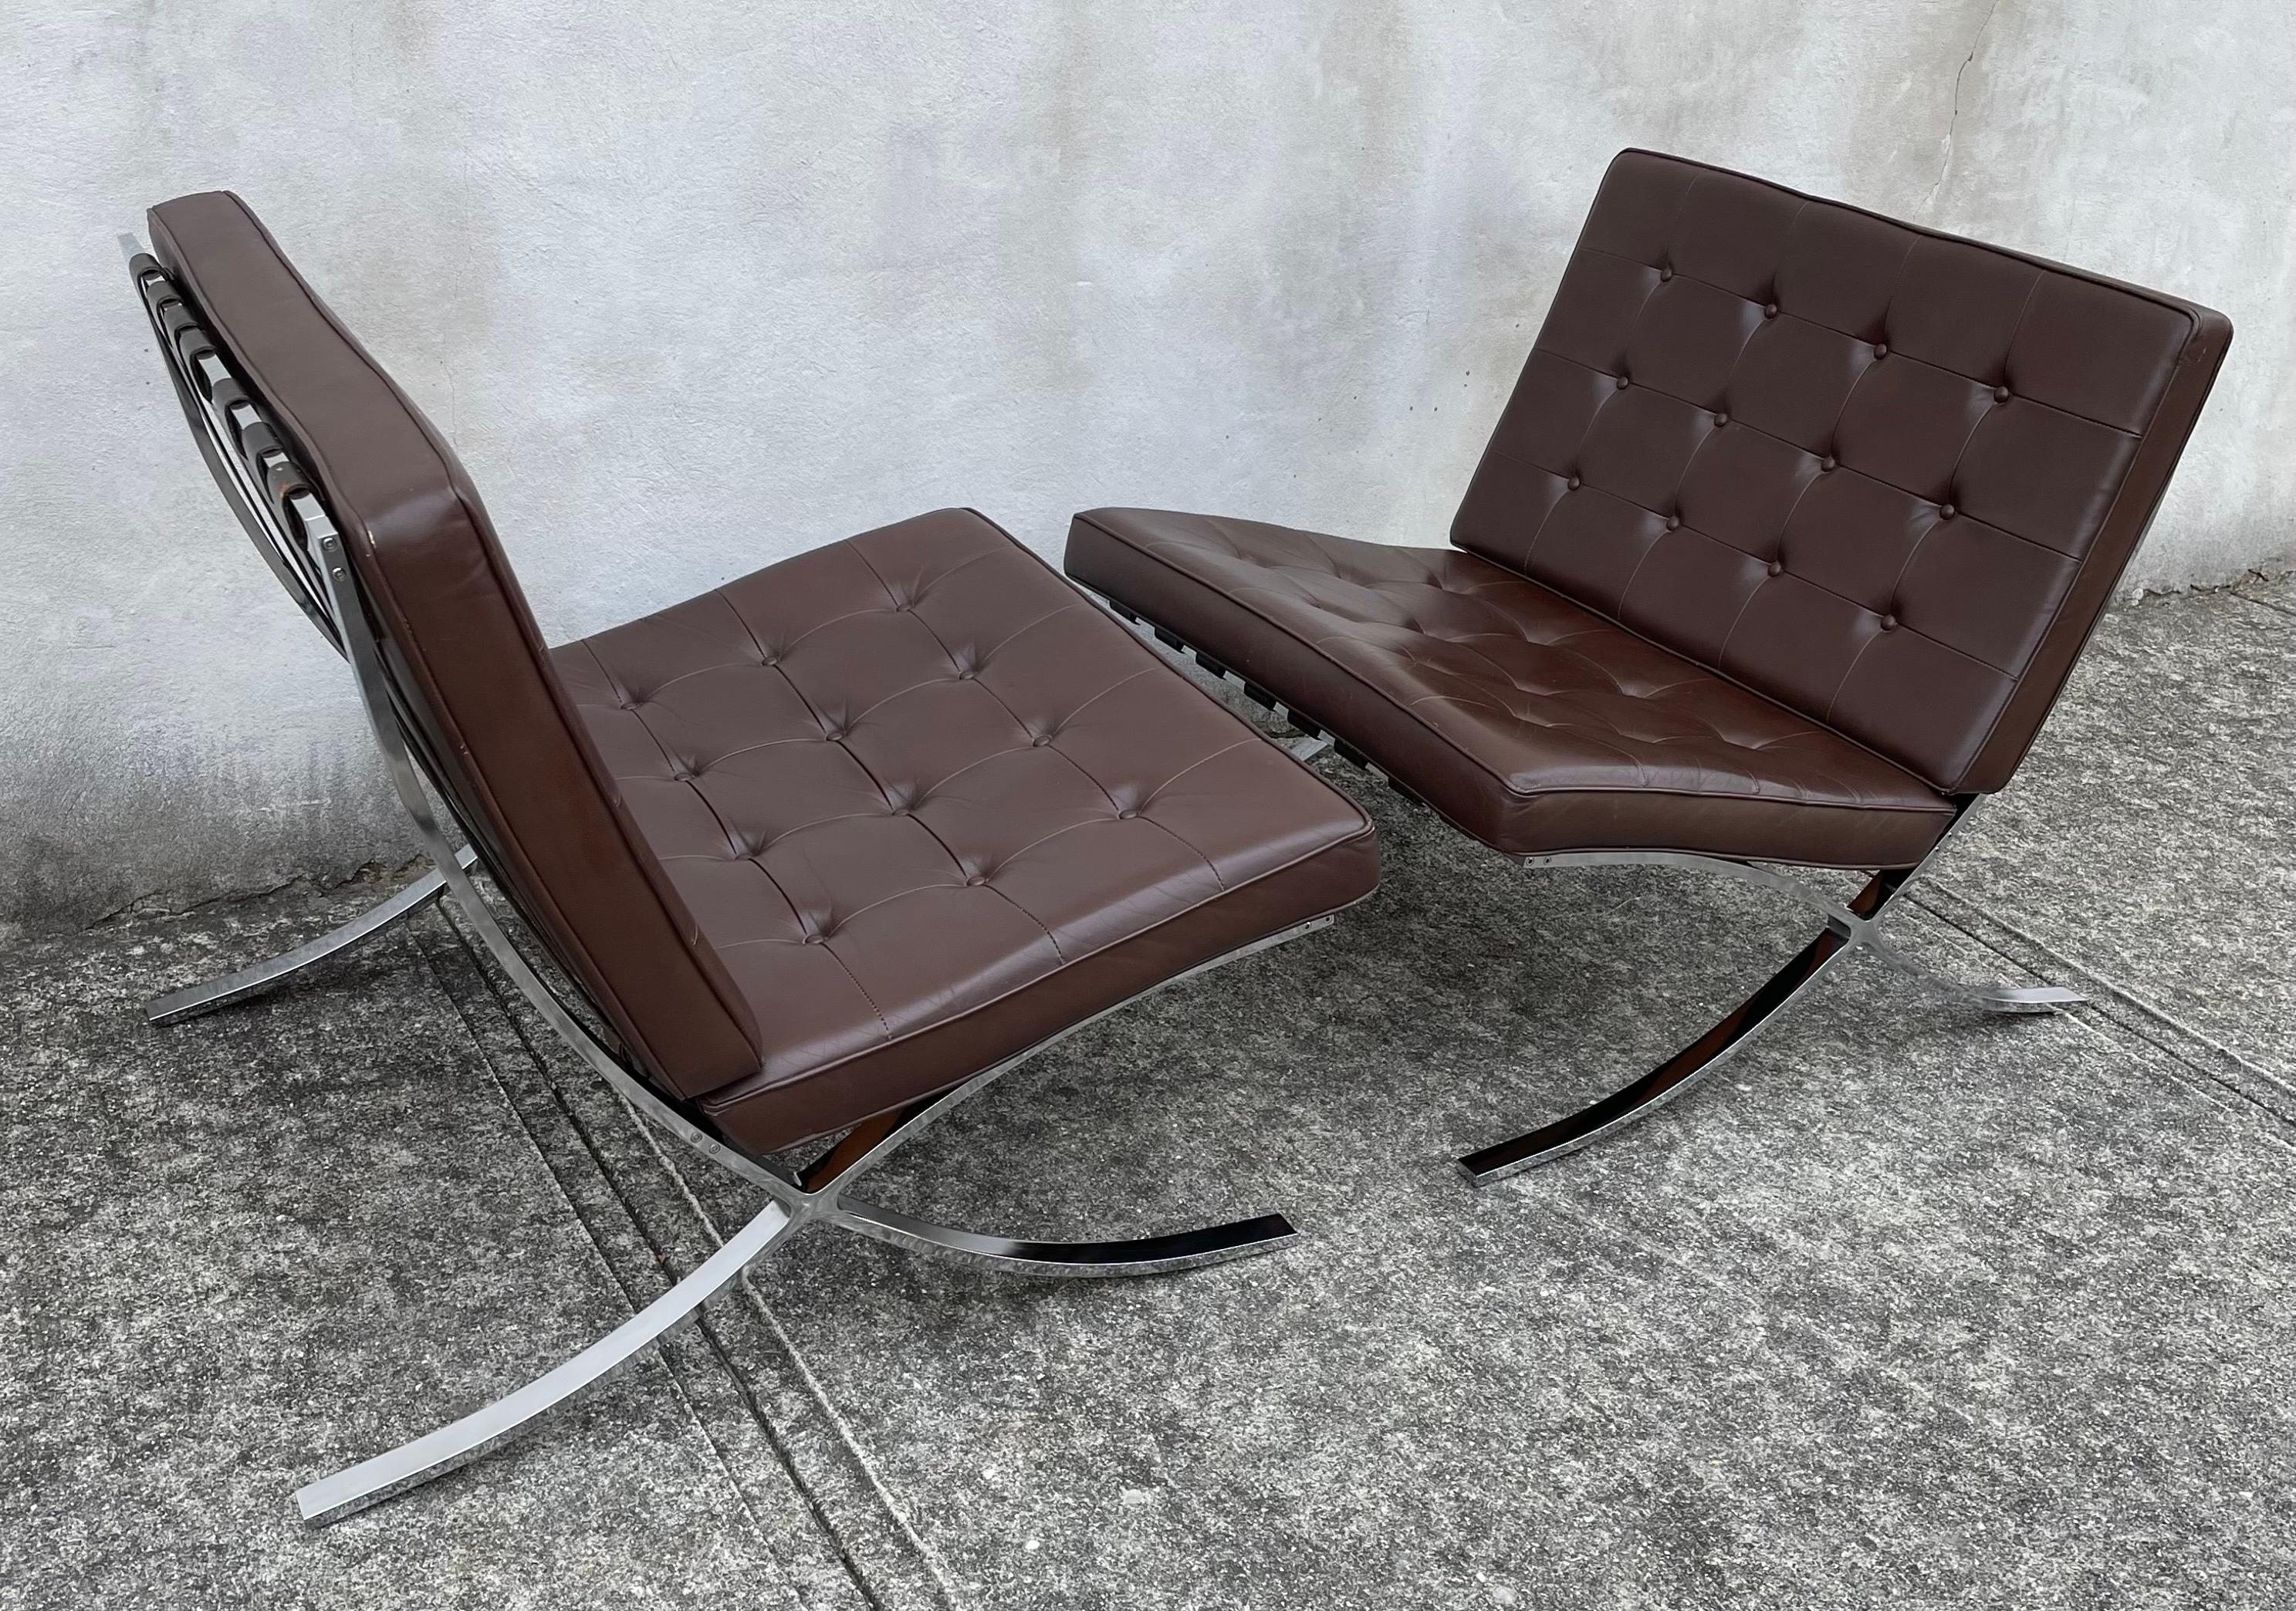 Beautiful original pair of mid-century Barcelona chairs in medium brown leather. One owner purchased in the West Village, NYC in the mid 1970's.